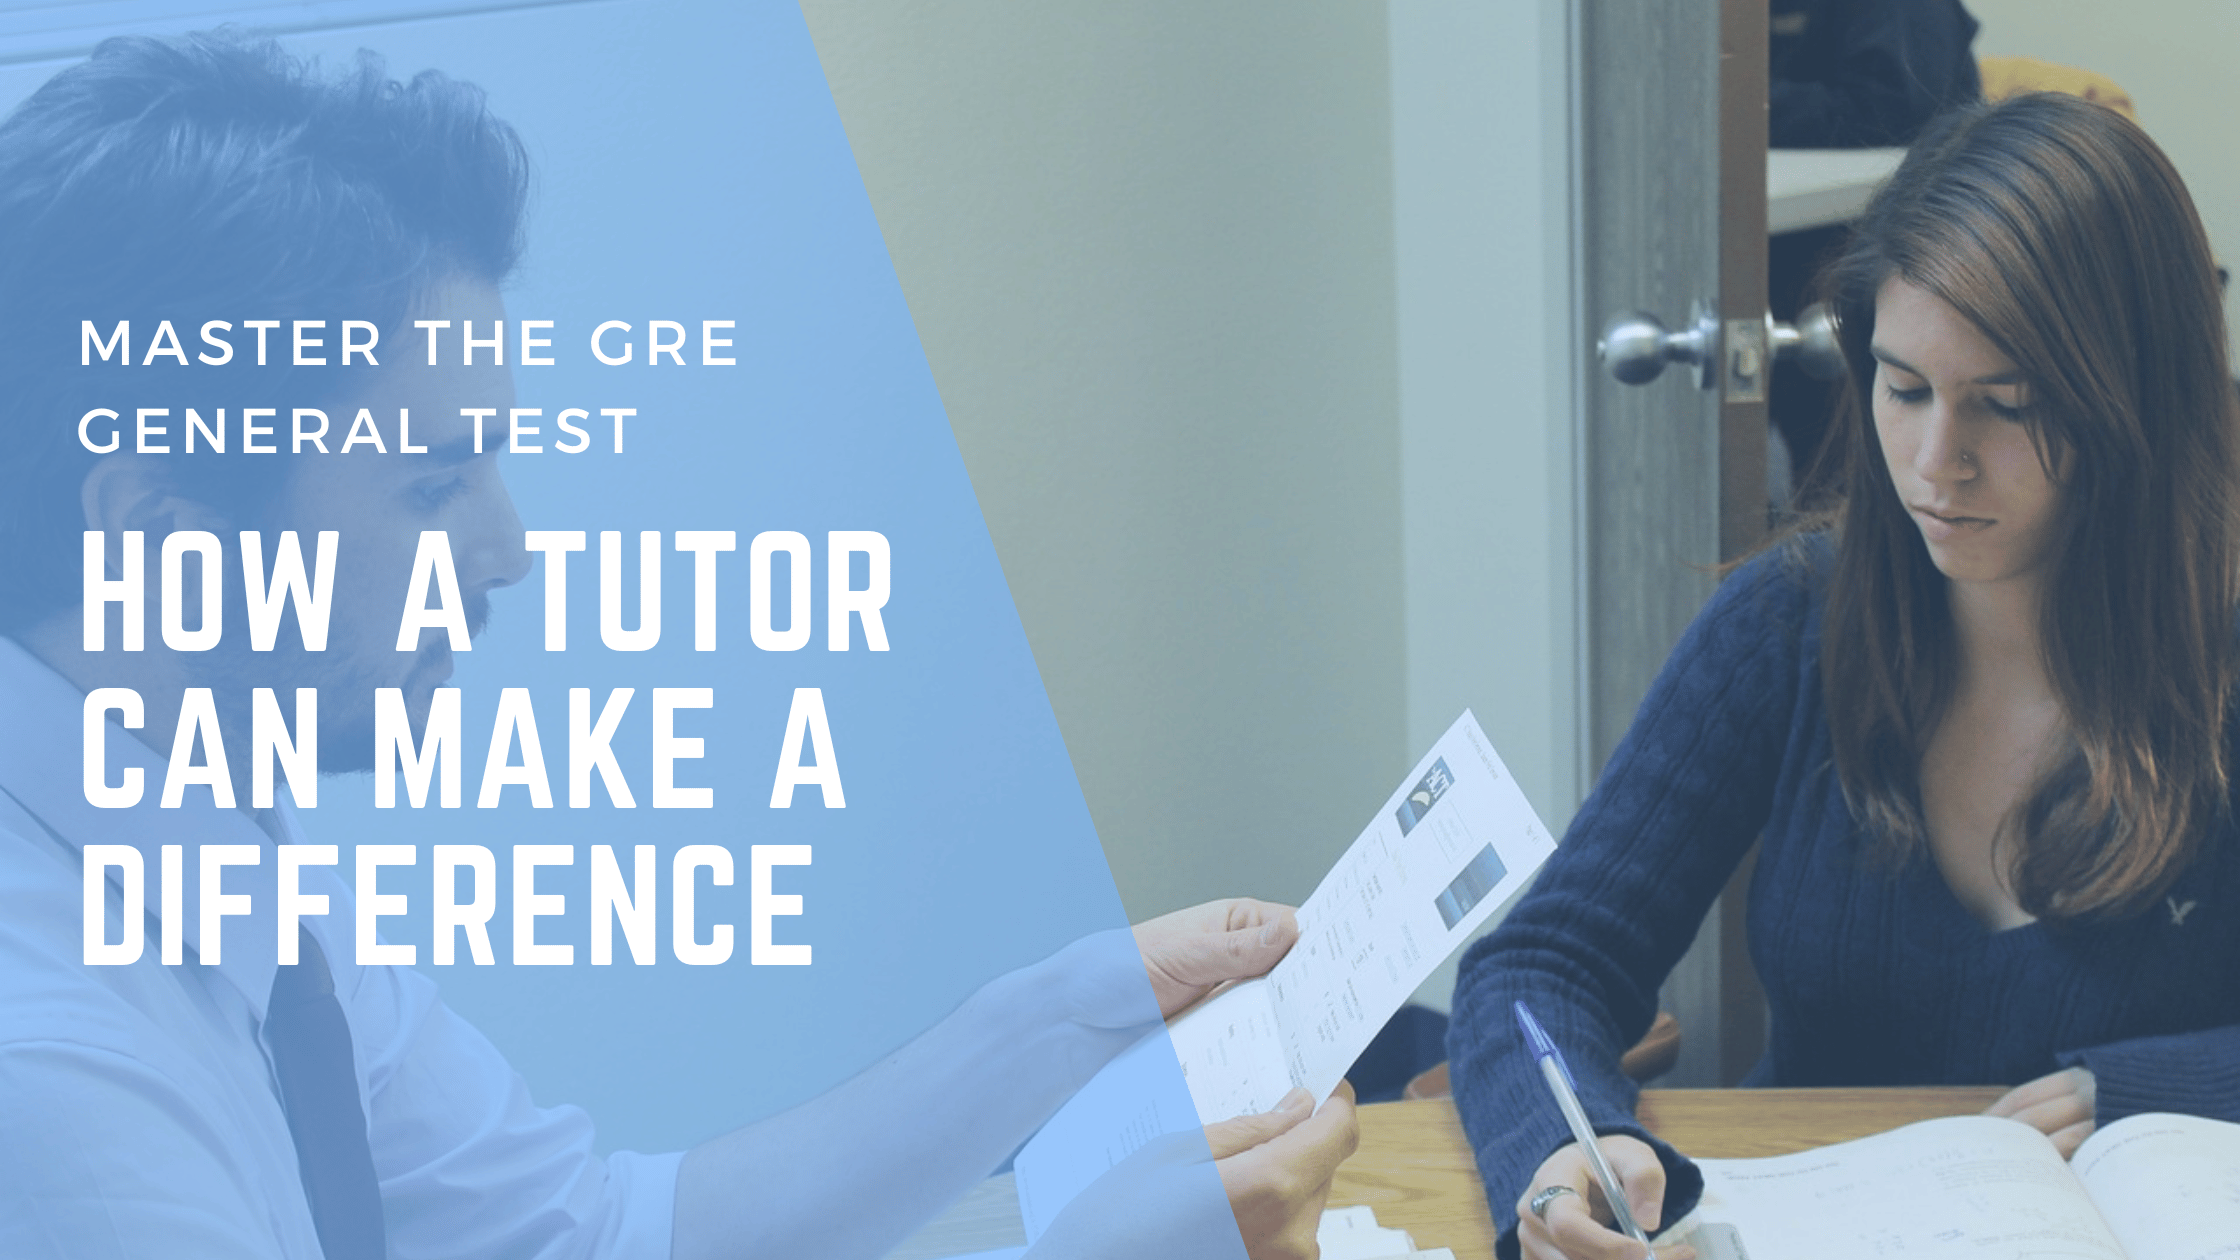 Master the GRE General Test How a Tutor Can Make a Difference